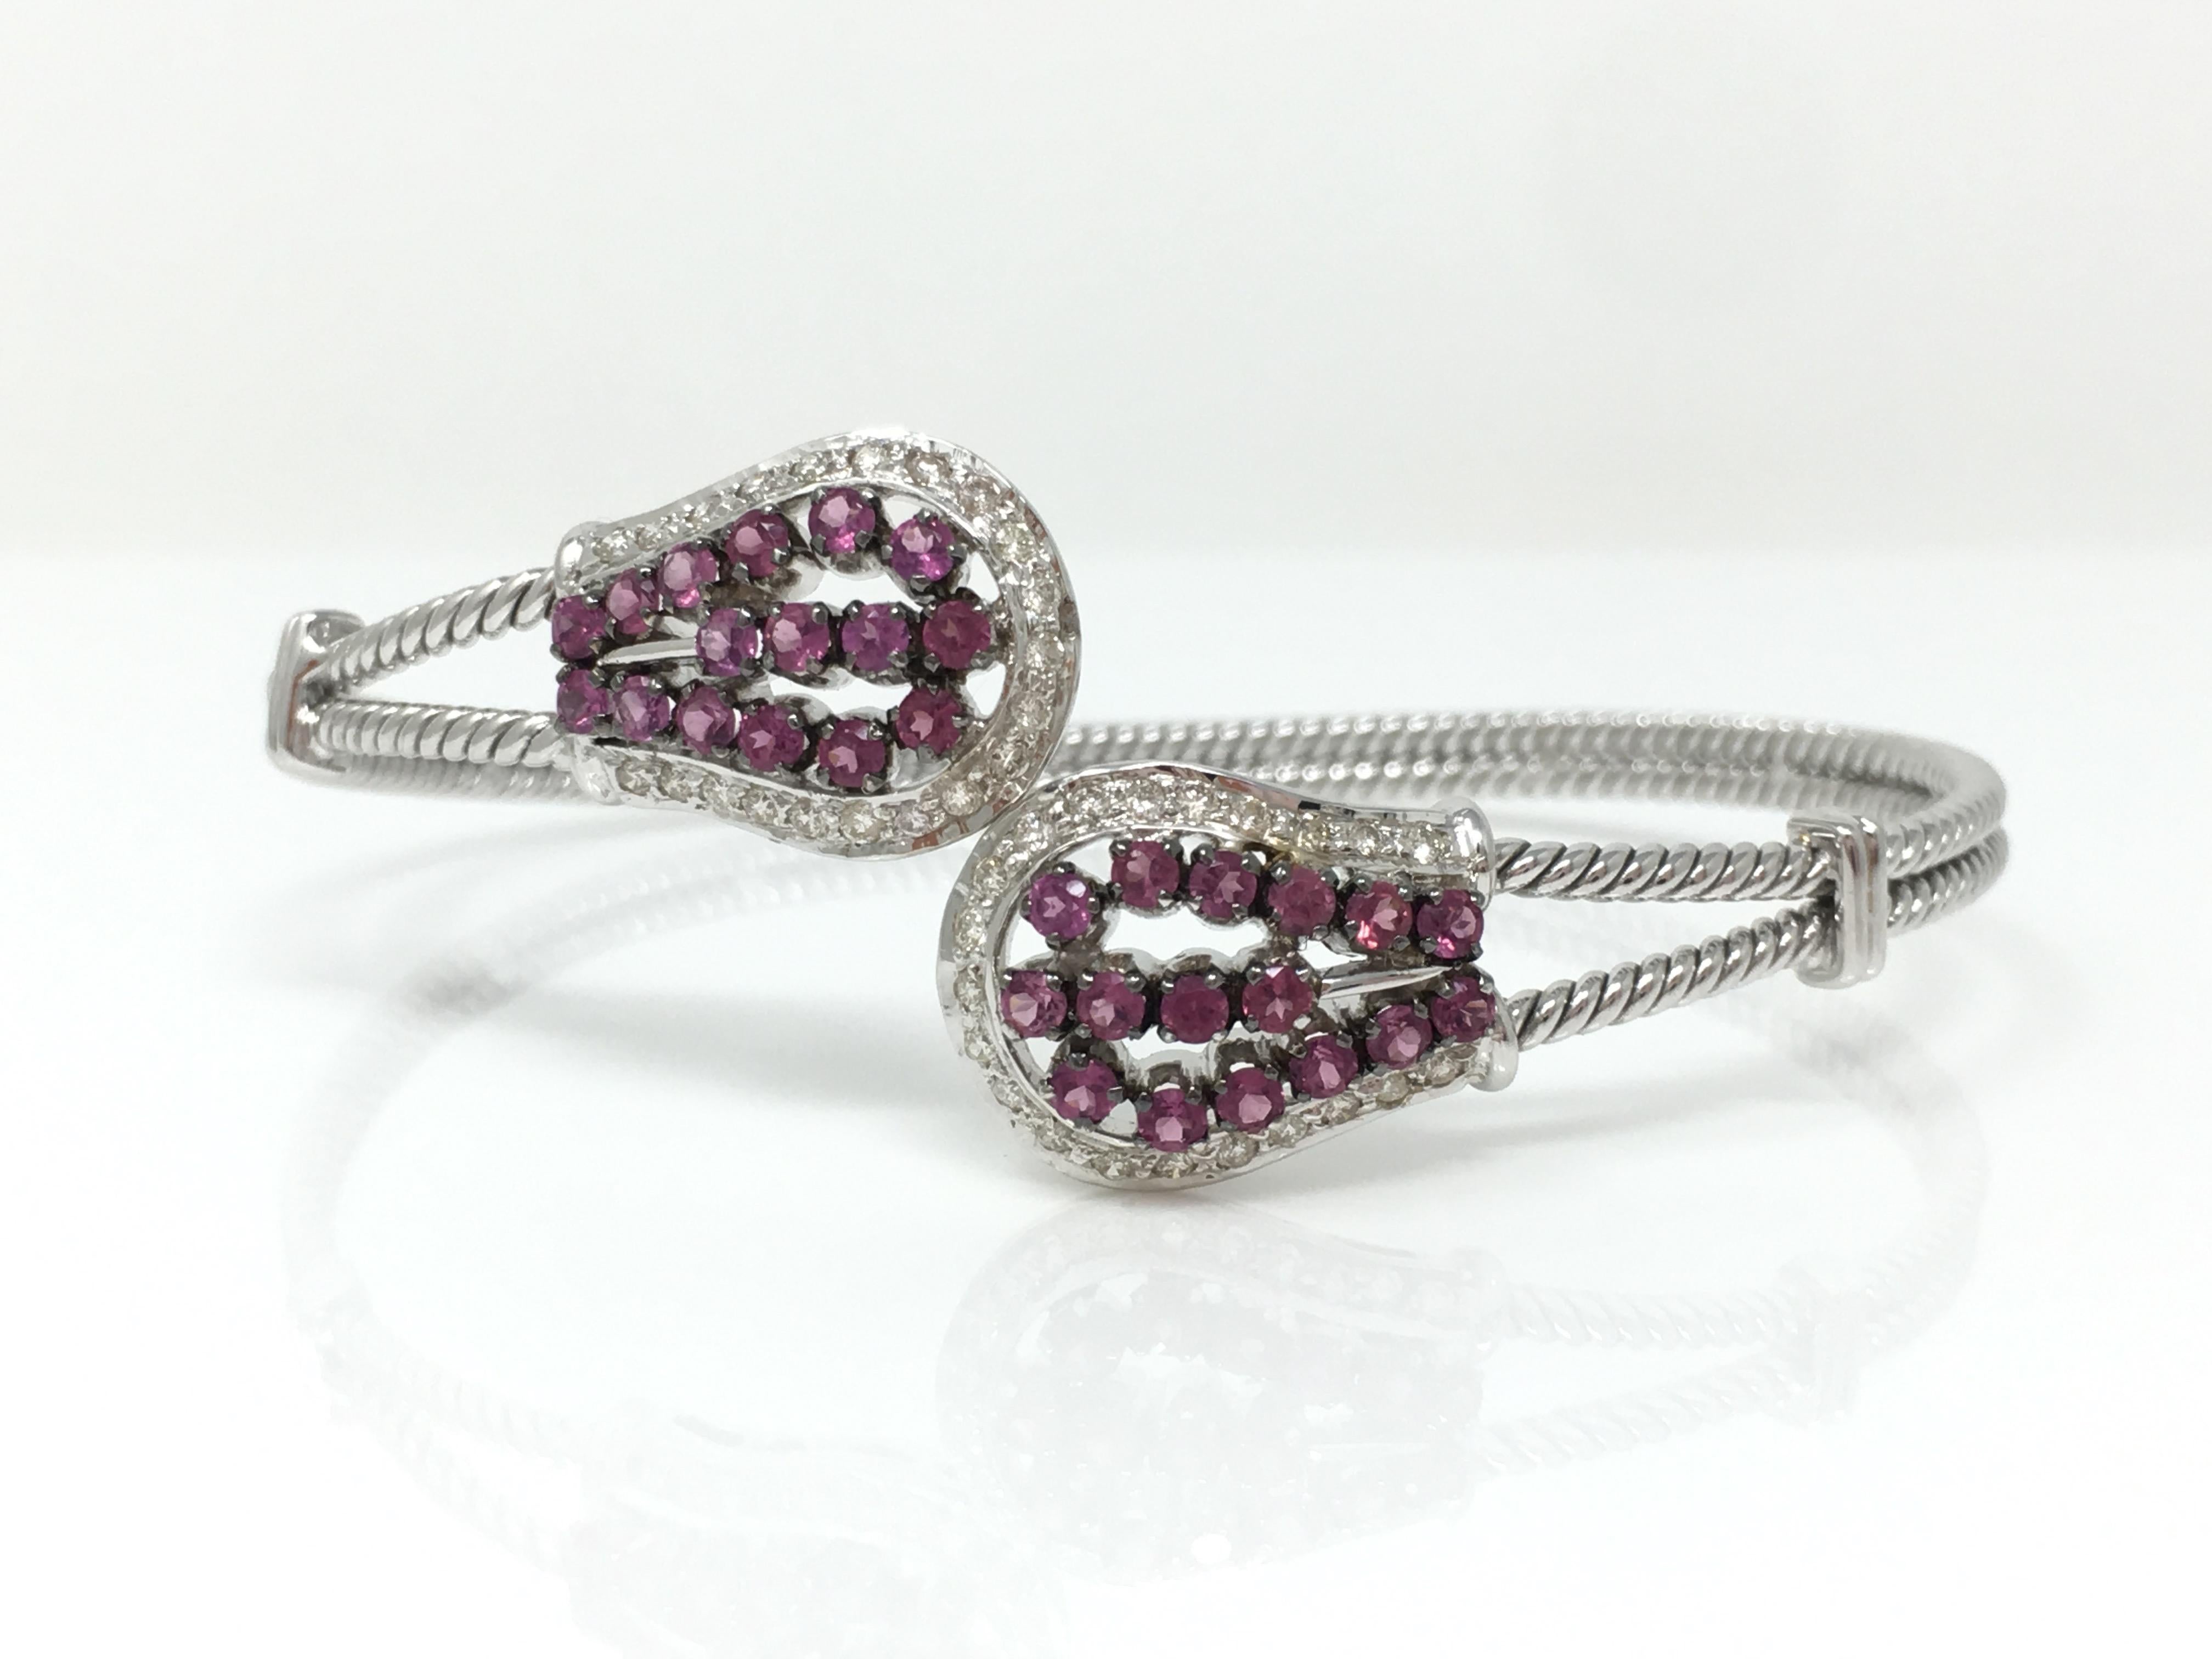 This beautifully hand made white round brilliant diamond and rubellite 18k white gold bangle is flexible and is adaptable to most wrist sizes. The white round brilliant diamond weighs 0.44 carat and rubelite weighs 1.52 carat. The gold weight is